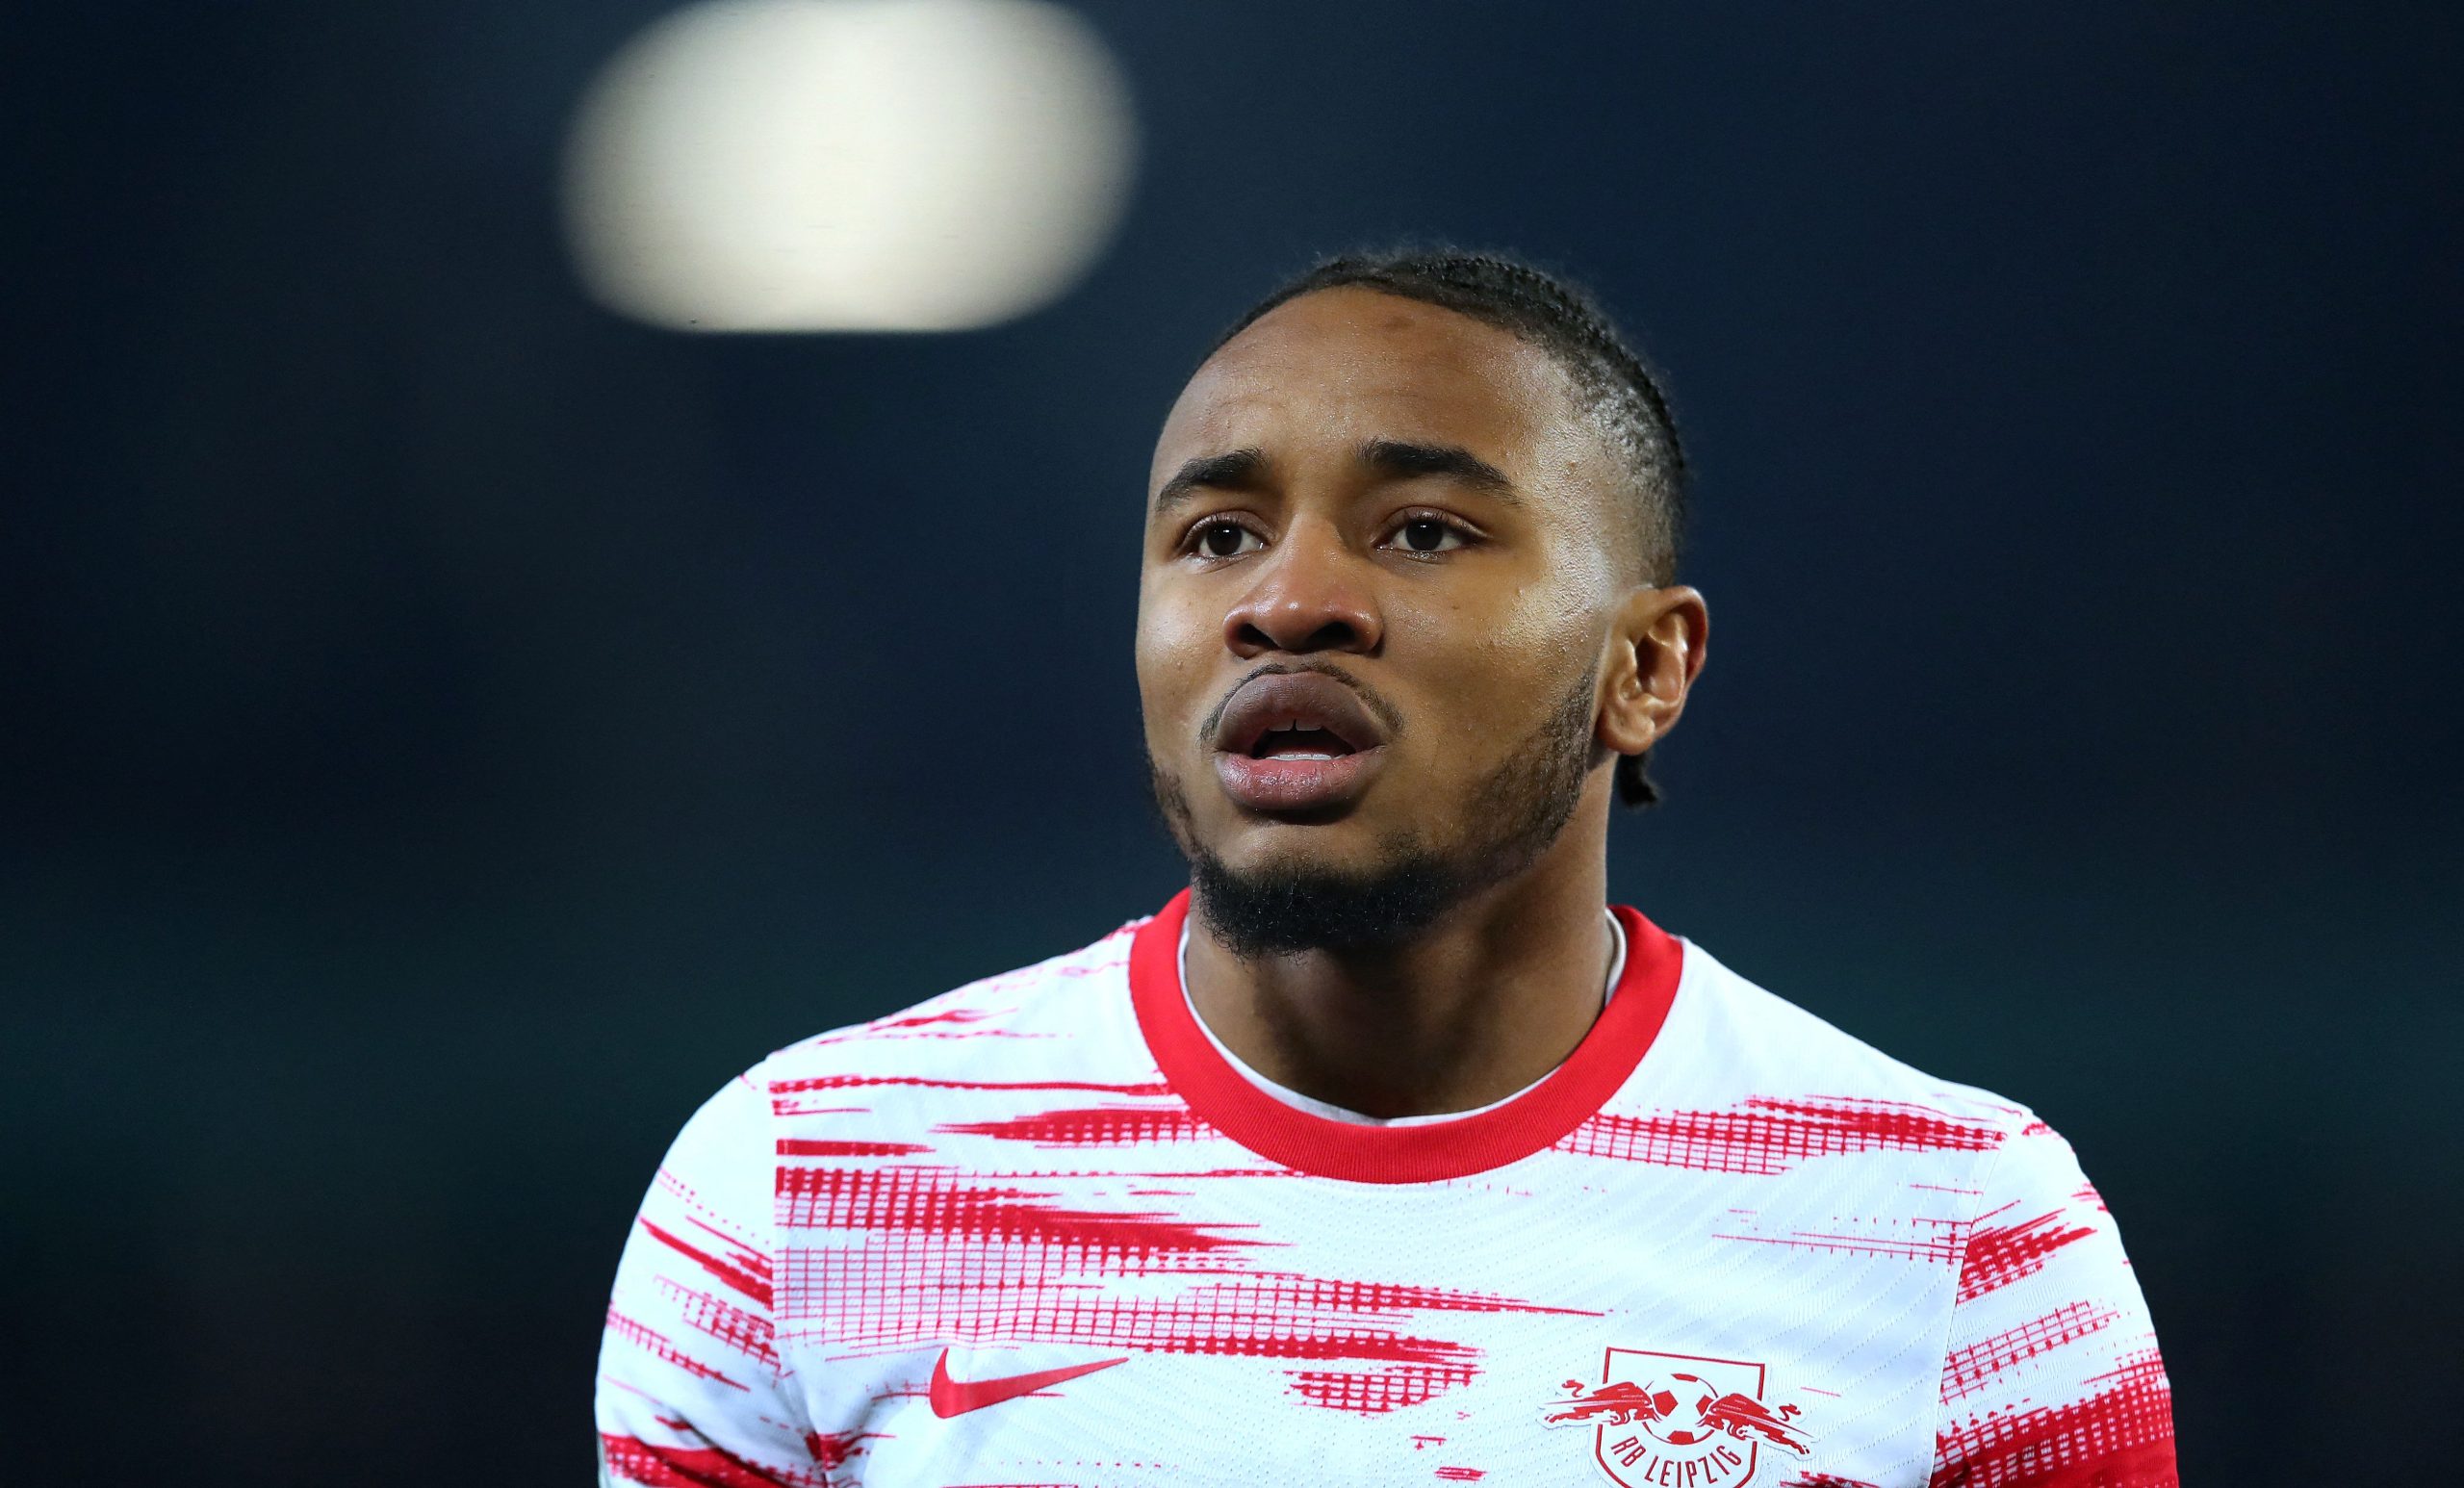 Leipzig boss Marco Rose responds to claims that Nkunku has agreed to join Chelsea.